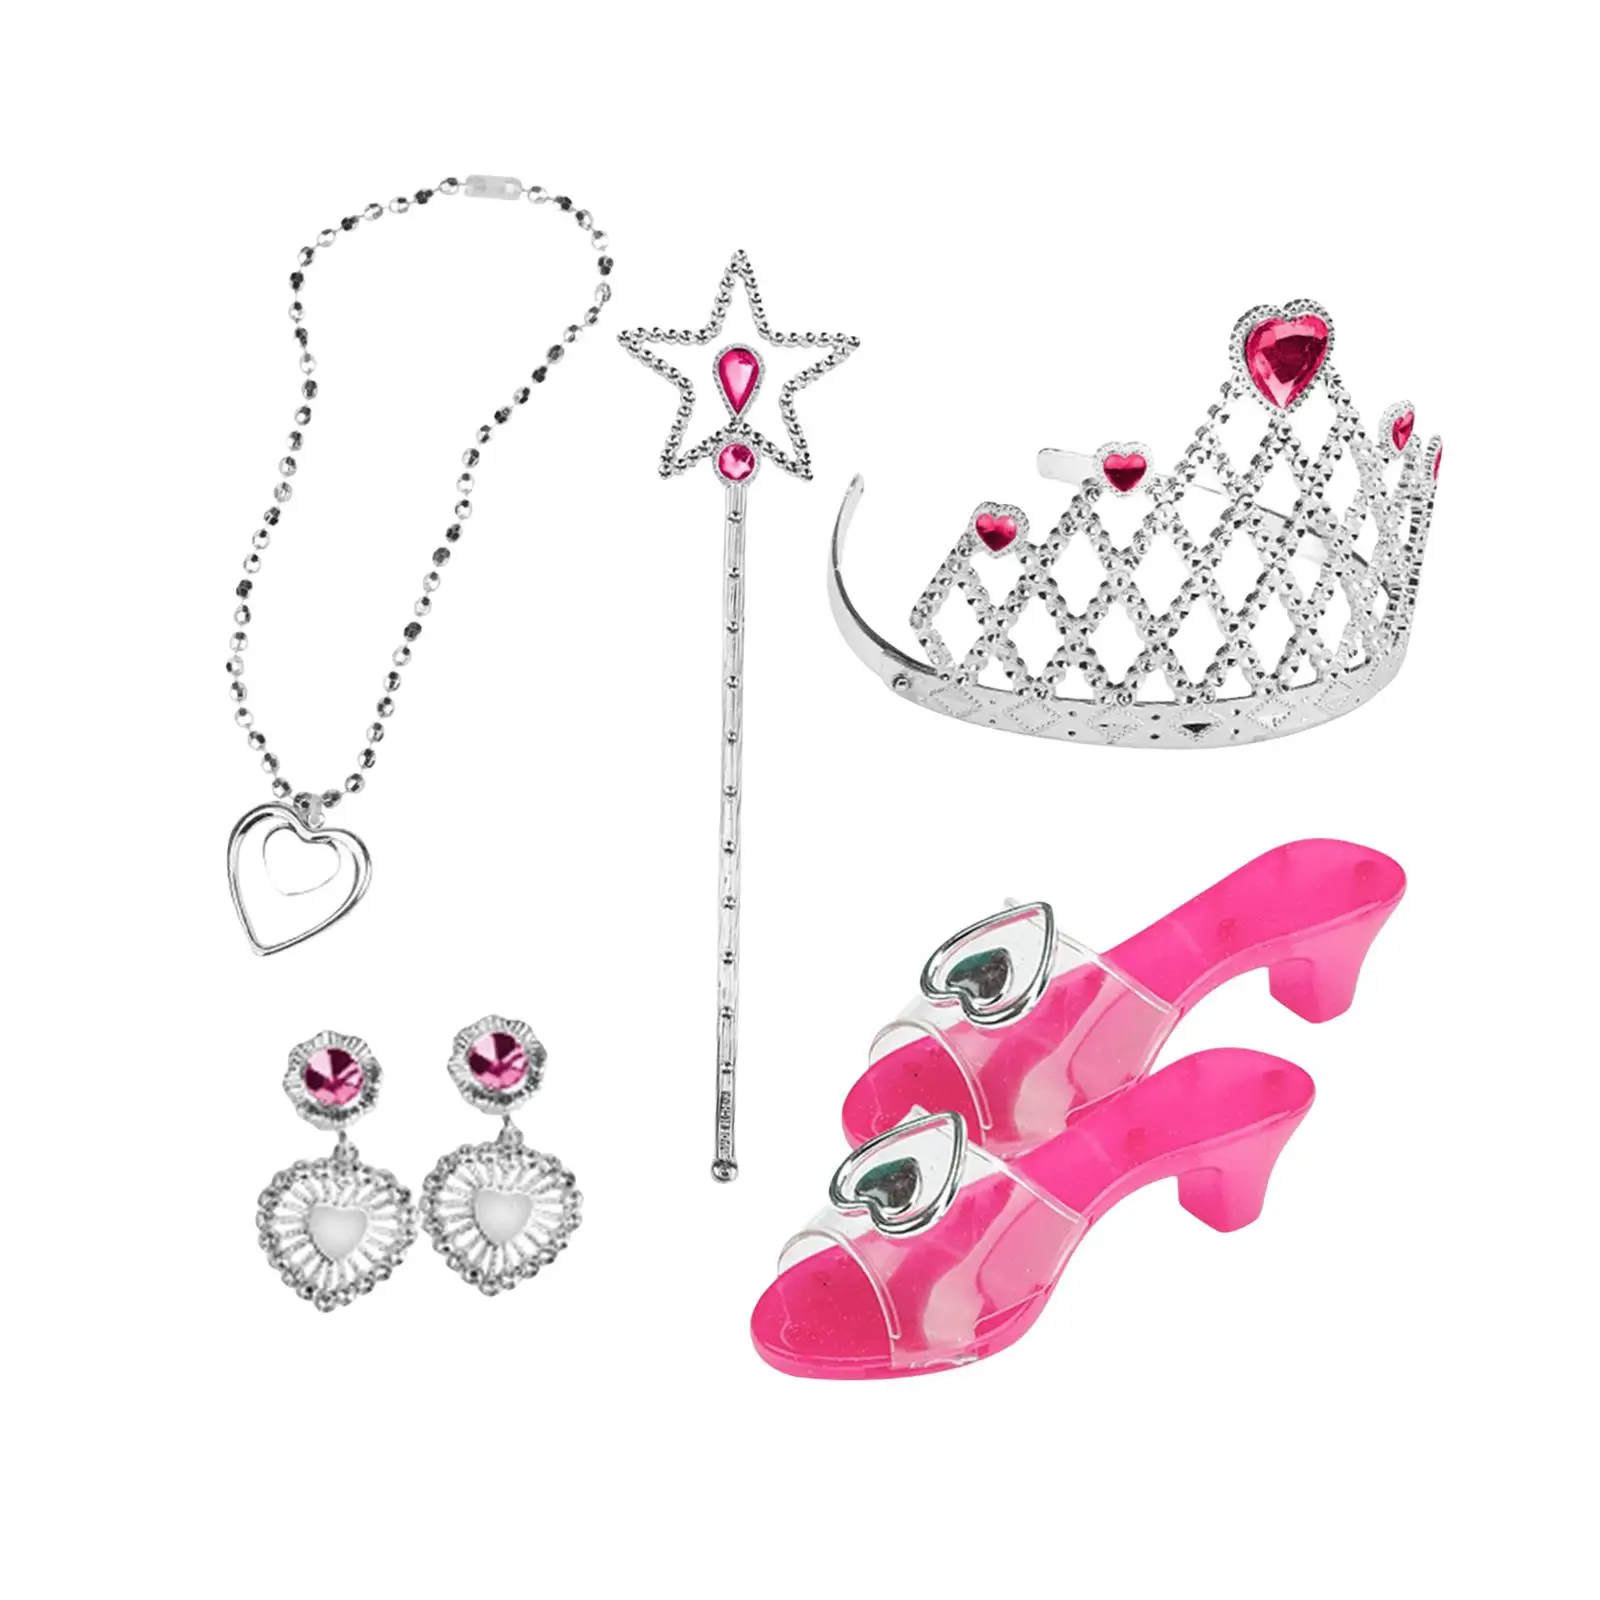 7x Little Girls Jewelry necklace crowns Shoes Girls Role Play Set pole